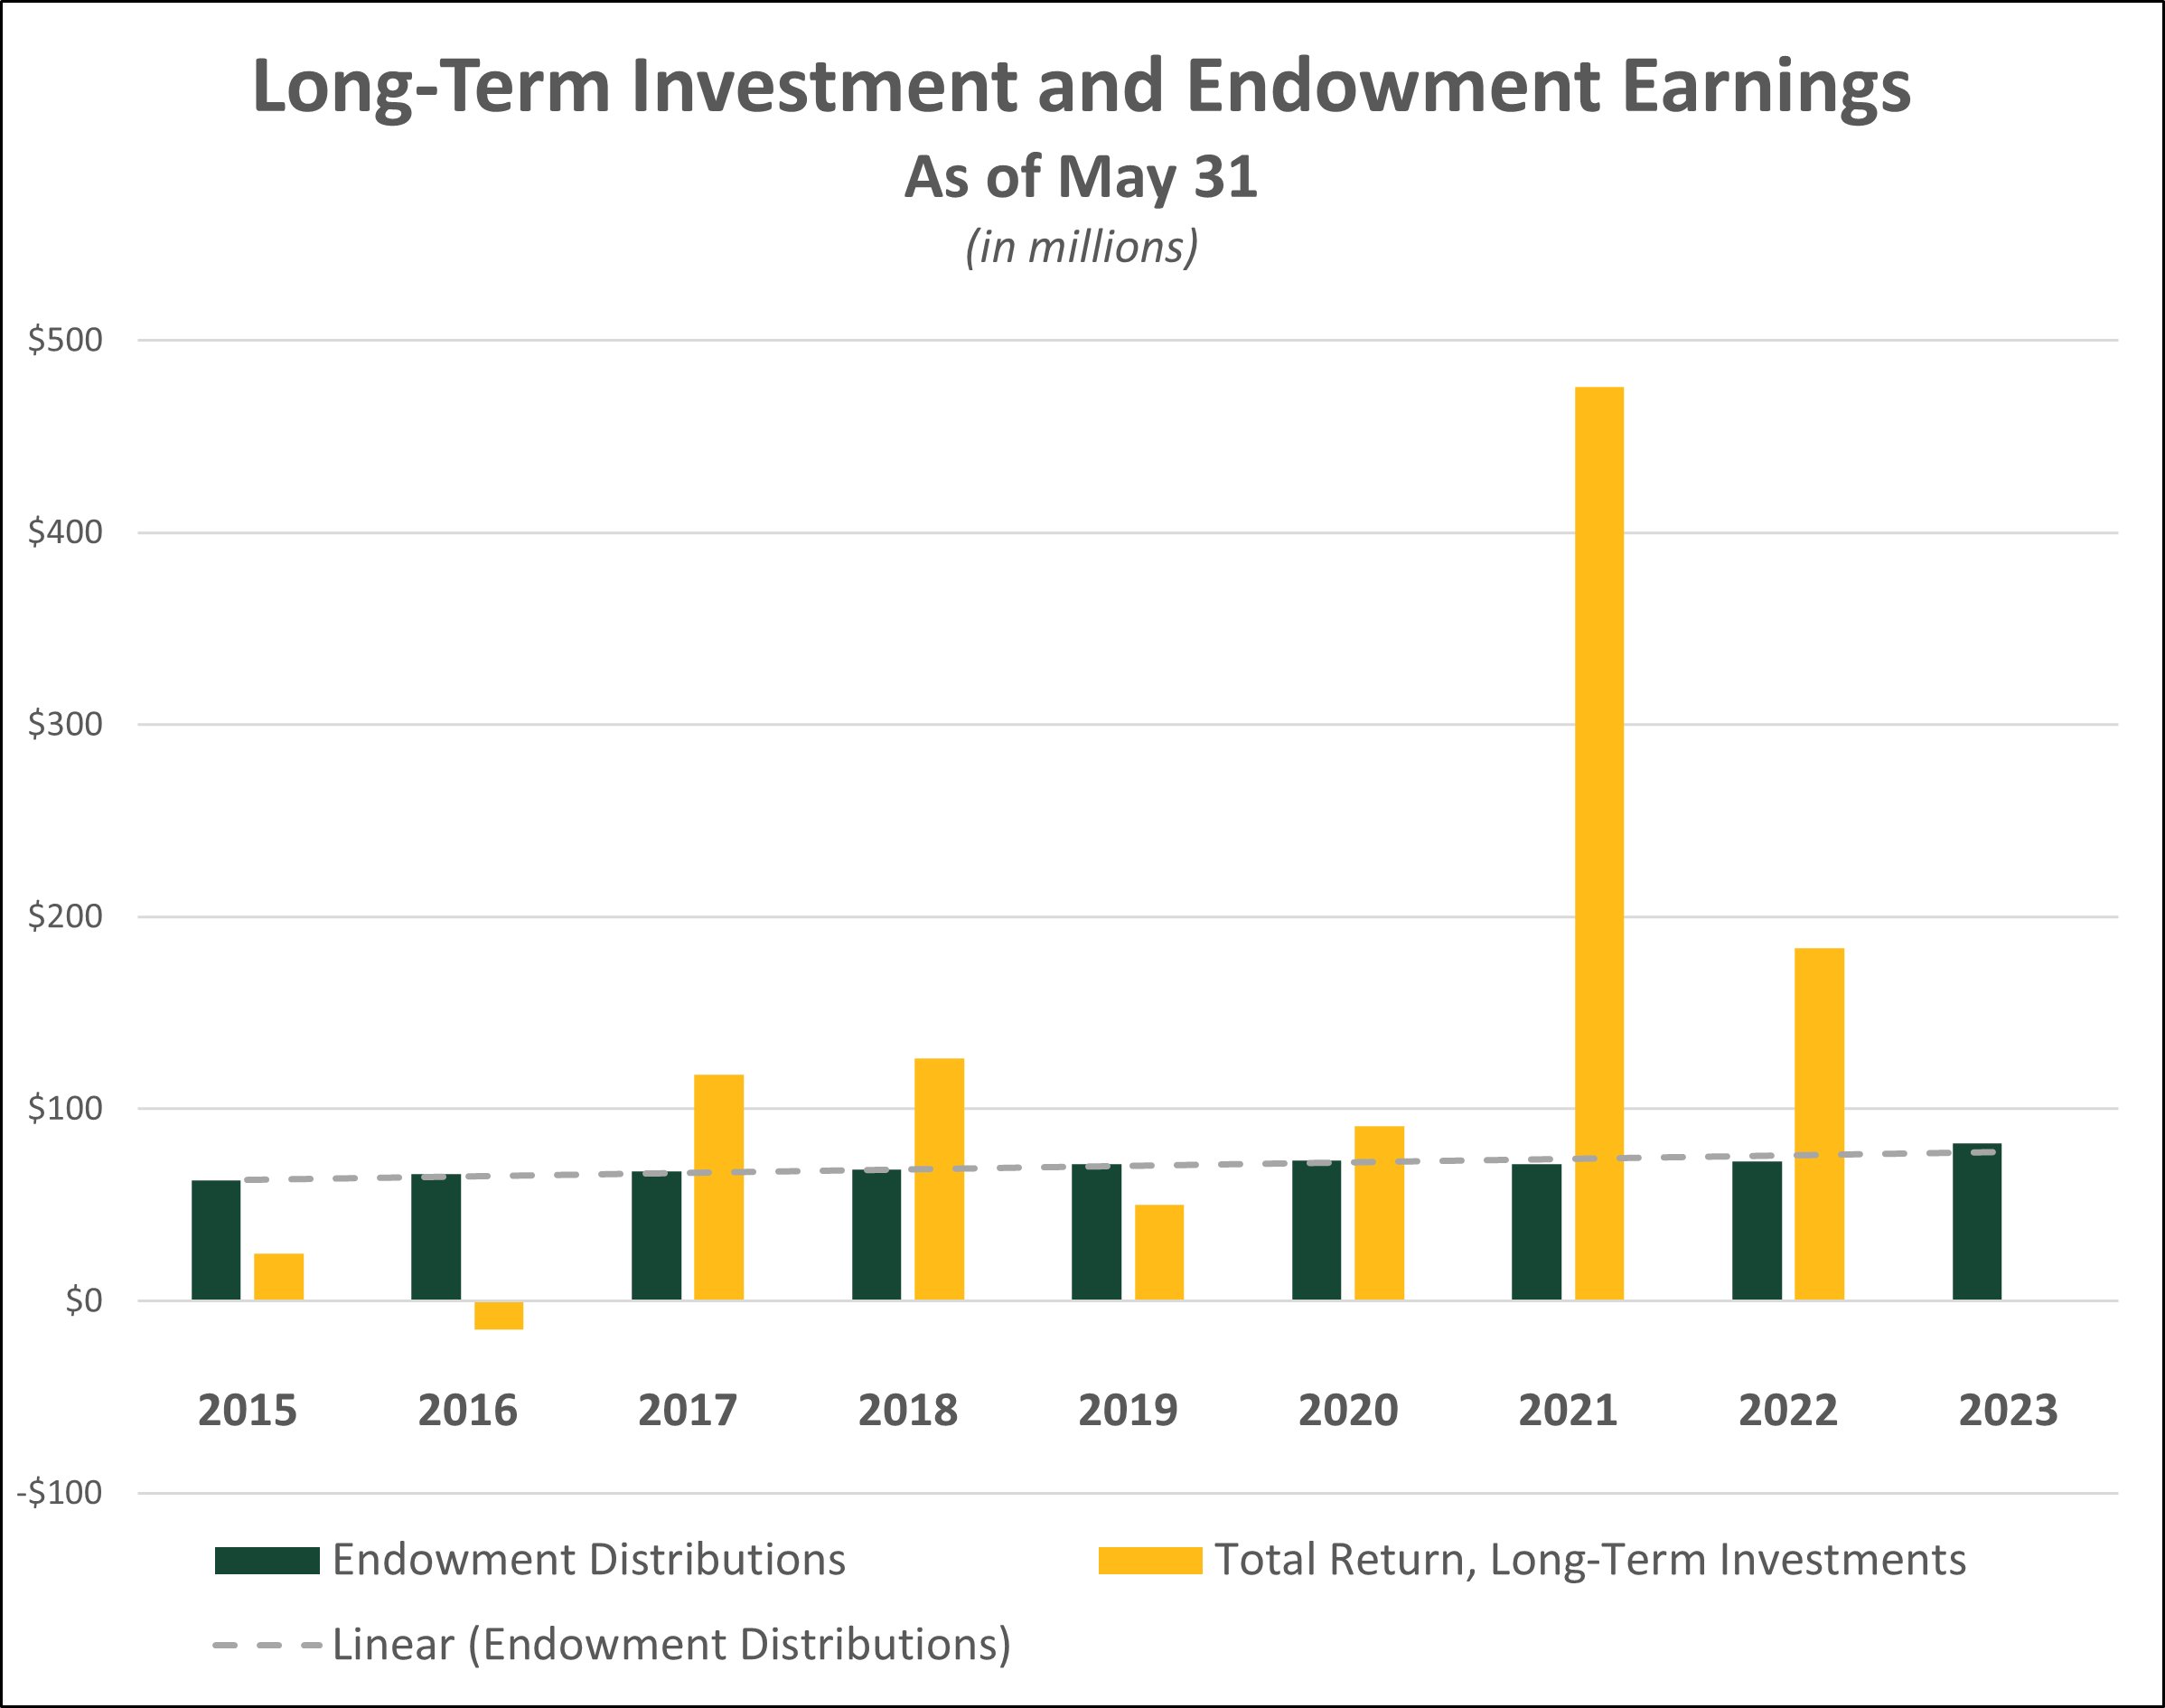 Long-Term Investment and Endowment Earnings As of May 31